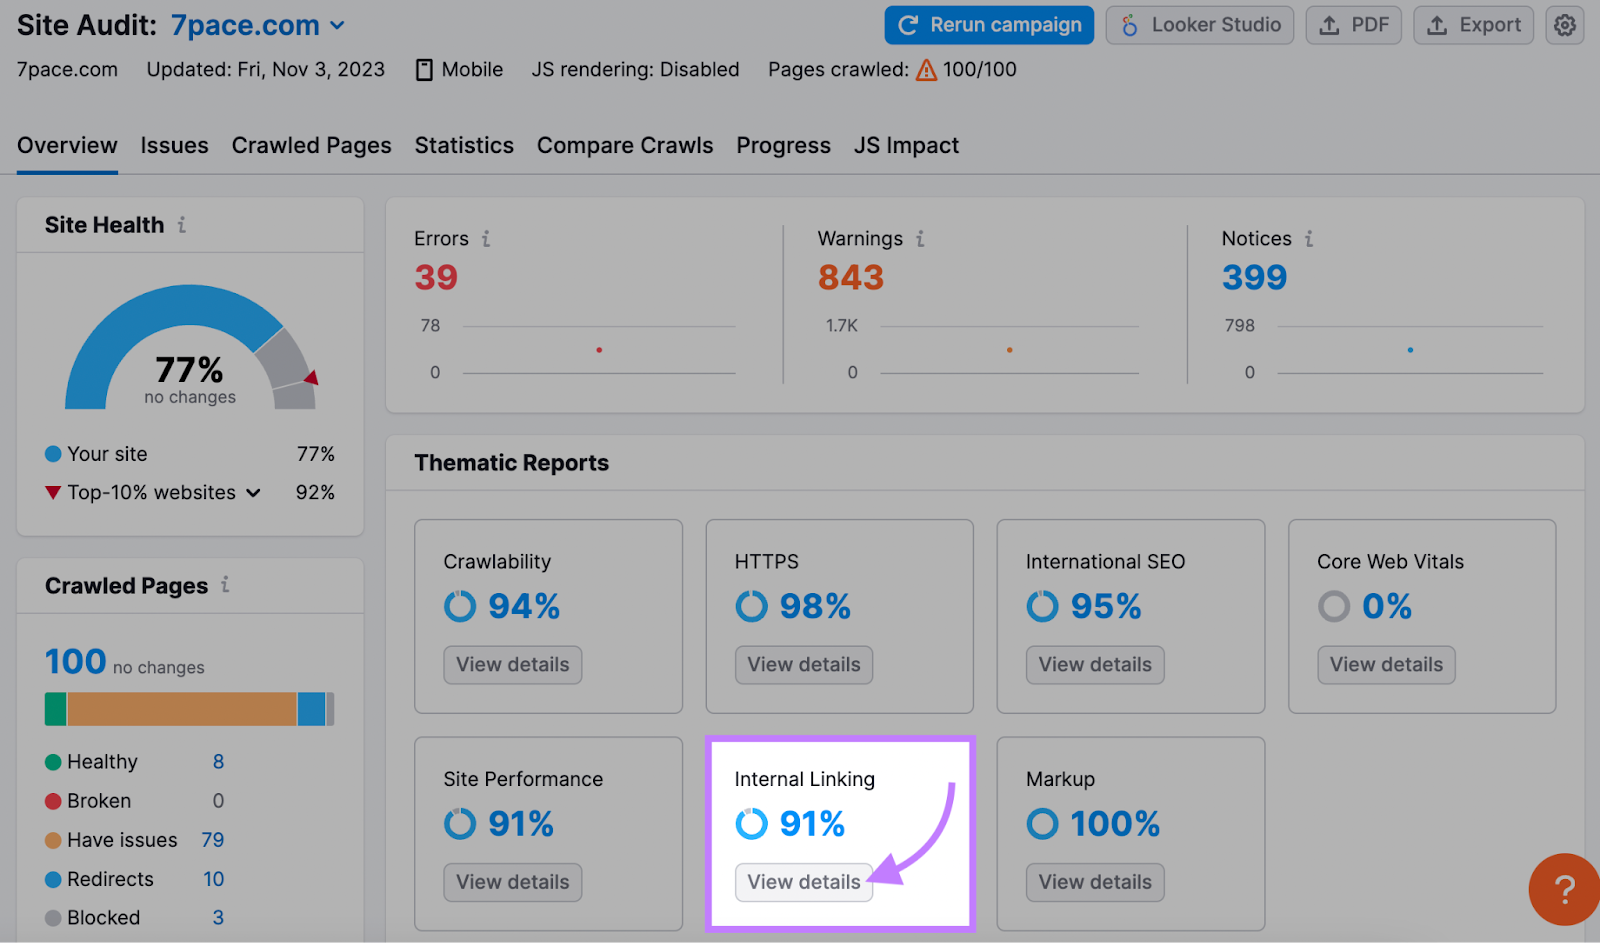 “Internal Linking” widget highlighted under "Thematic Reports" in Site Audit overview dashboard